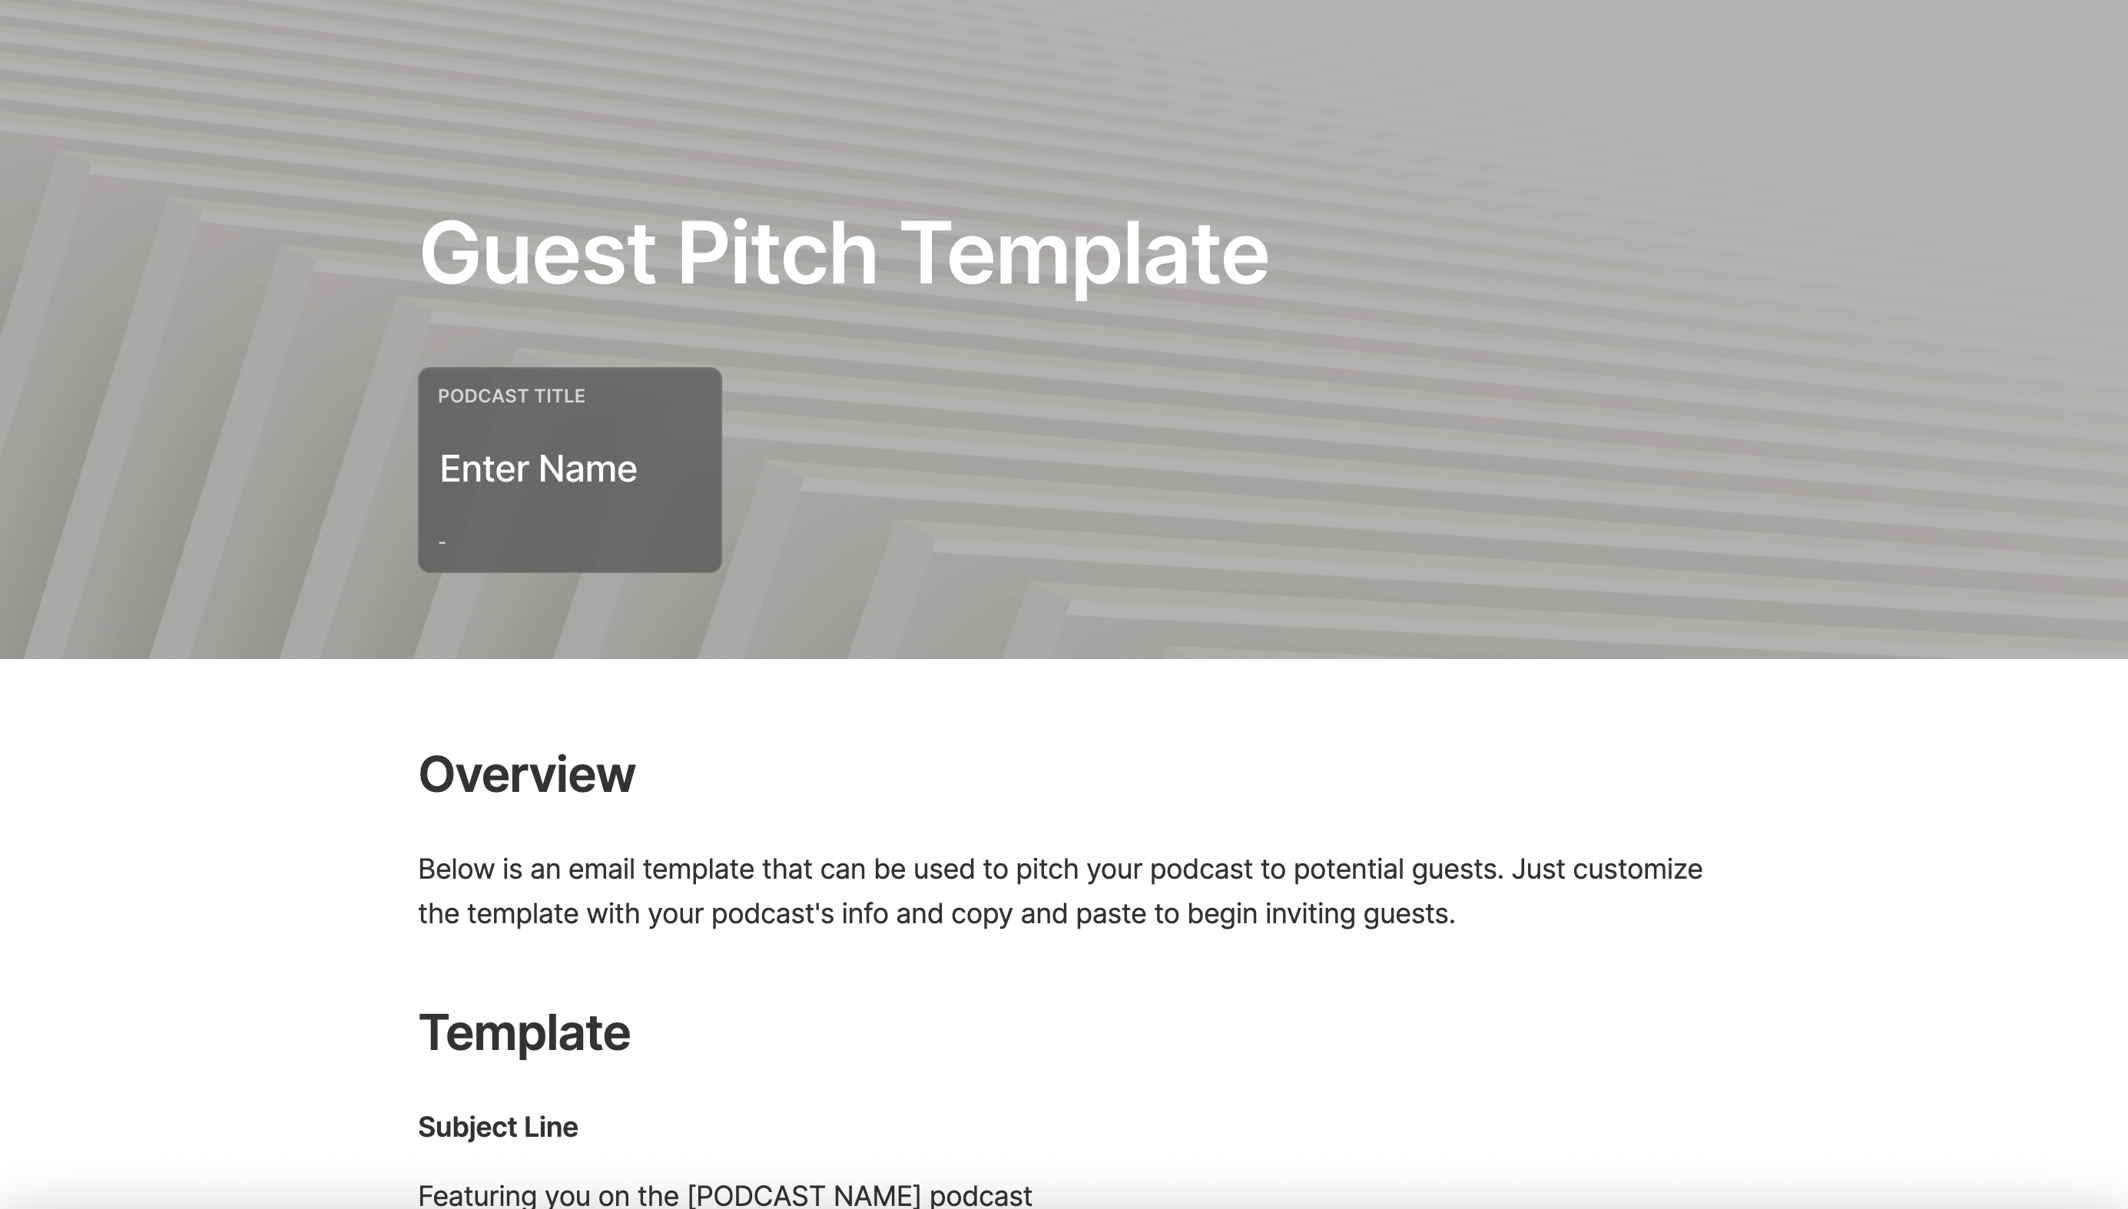 https://3389140.fs1.hubspotusercontent-na1.net/hubfs/3389140/podcast%20guest%20pitch%20template%20cover.png